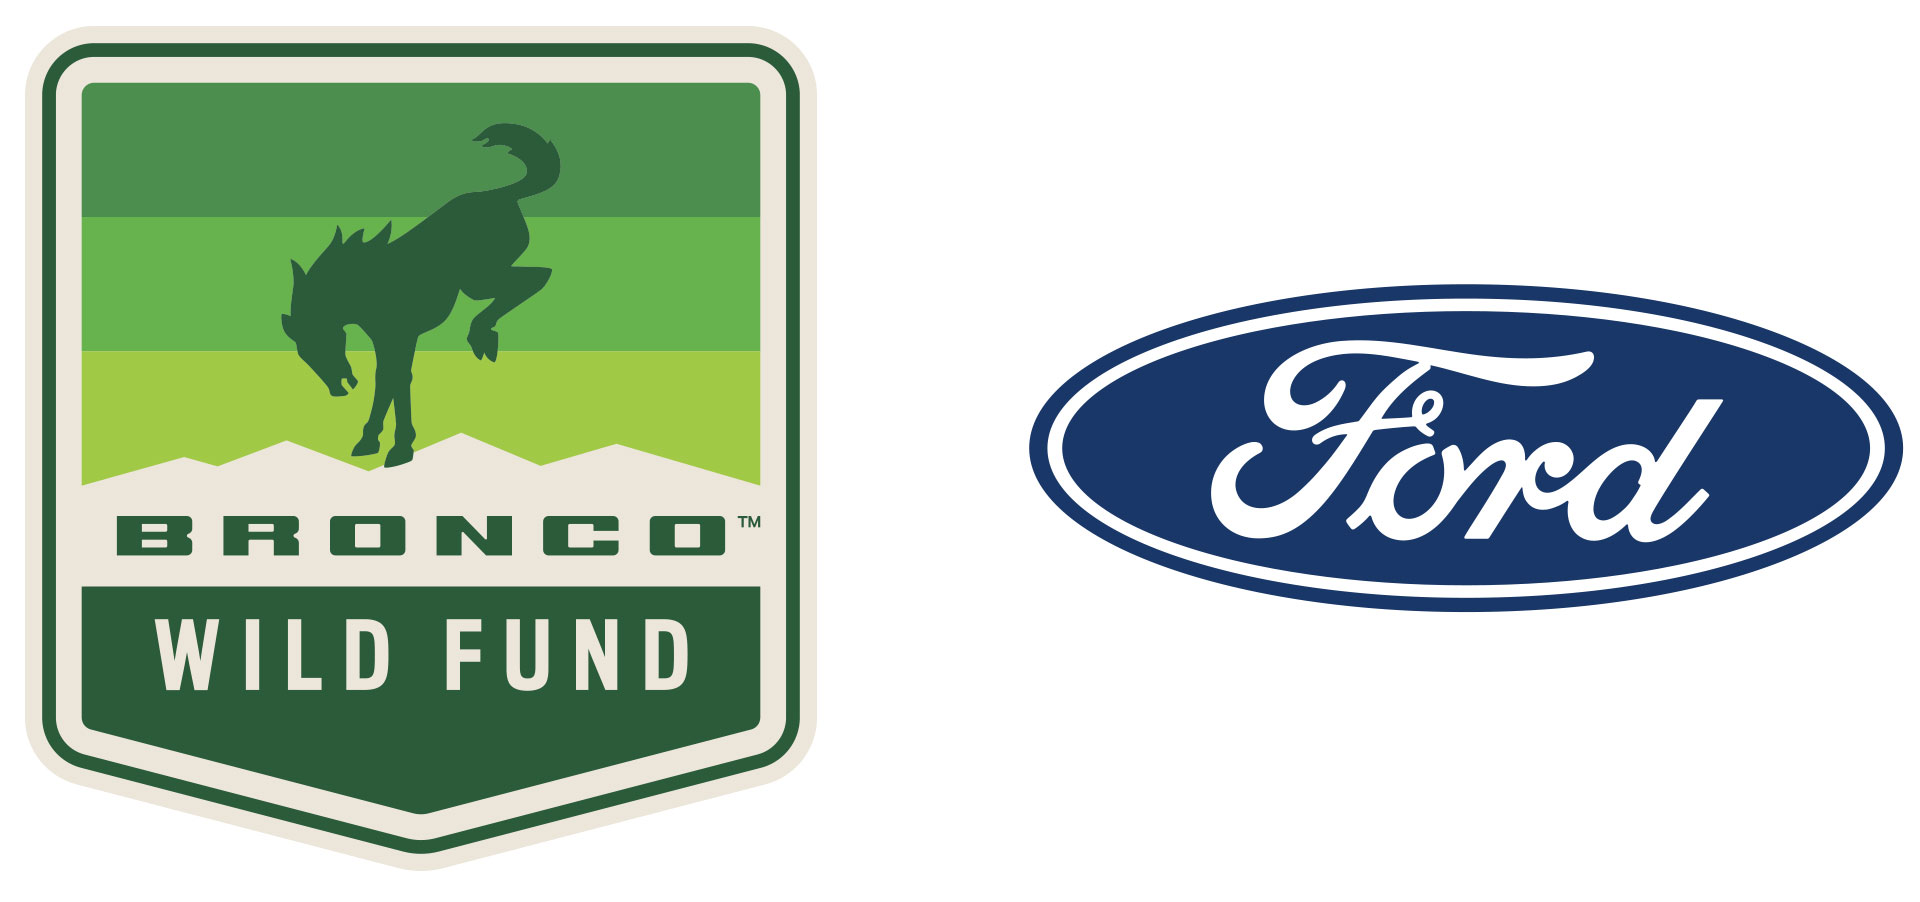 Bronco Wild Fund and Ford logos